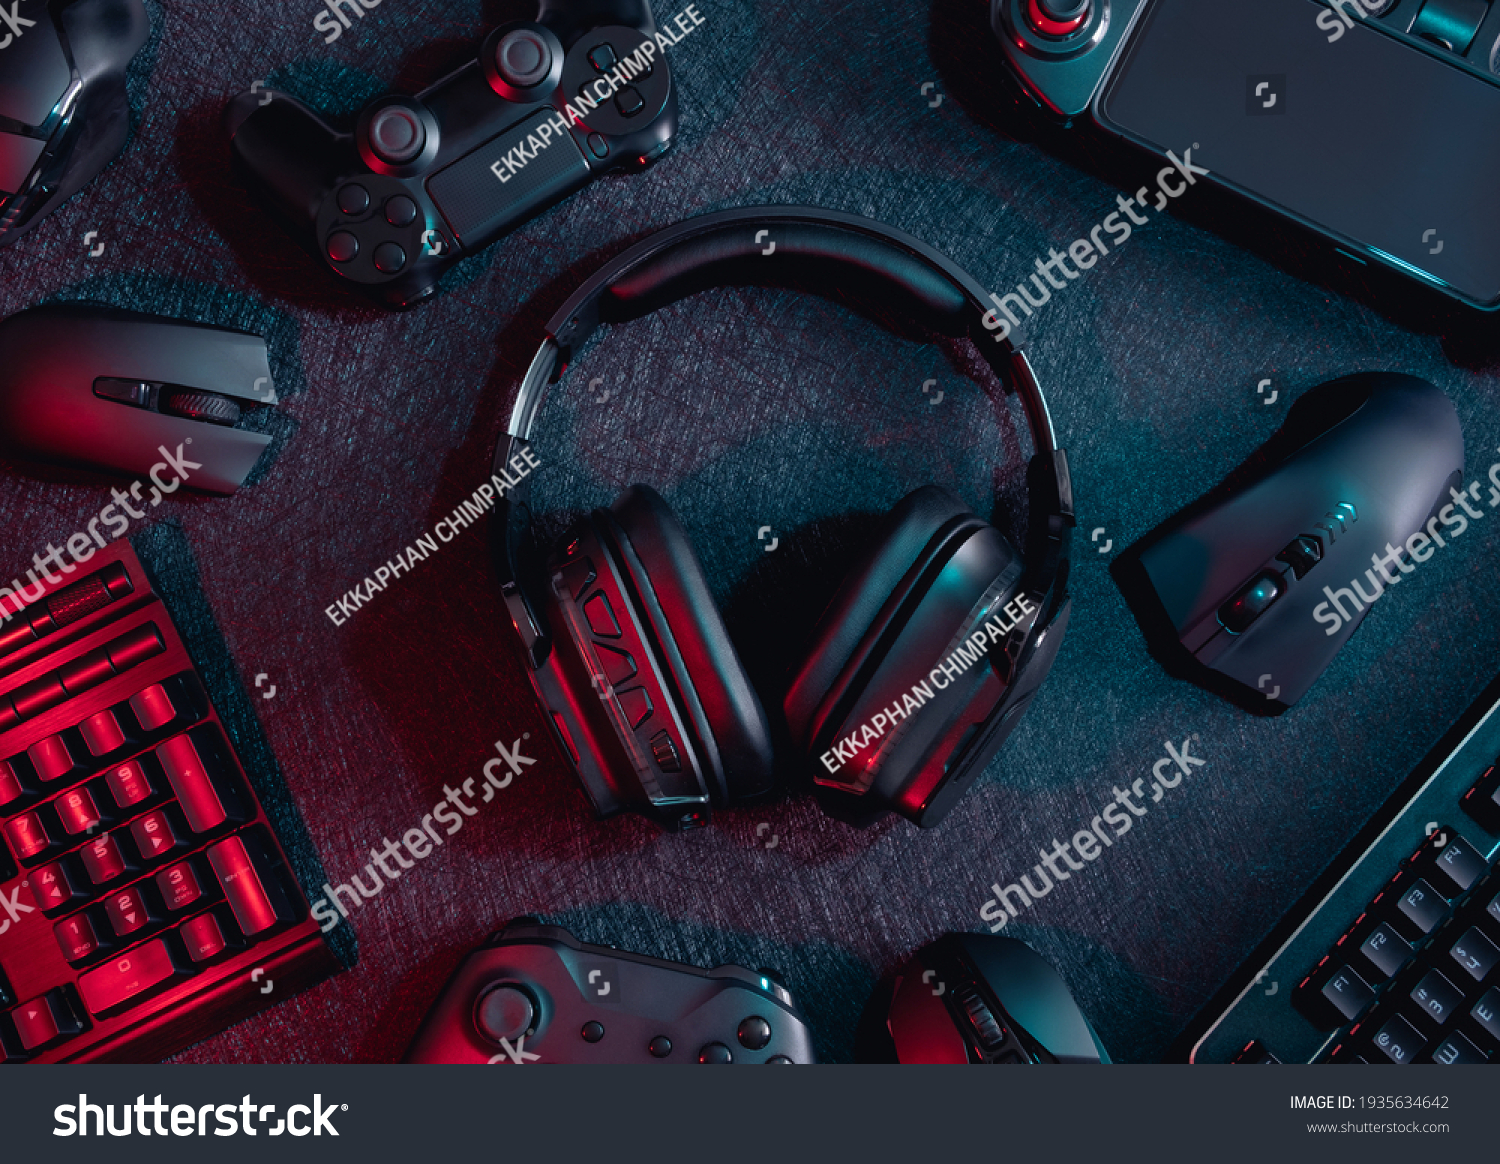 gamer work space concept, top view a gaming gear, mouse, keyboard, joystick, headset with rgb color on black table background. #1935634642